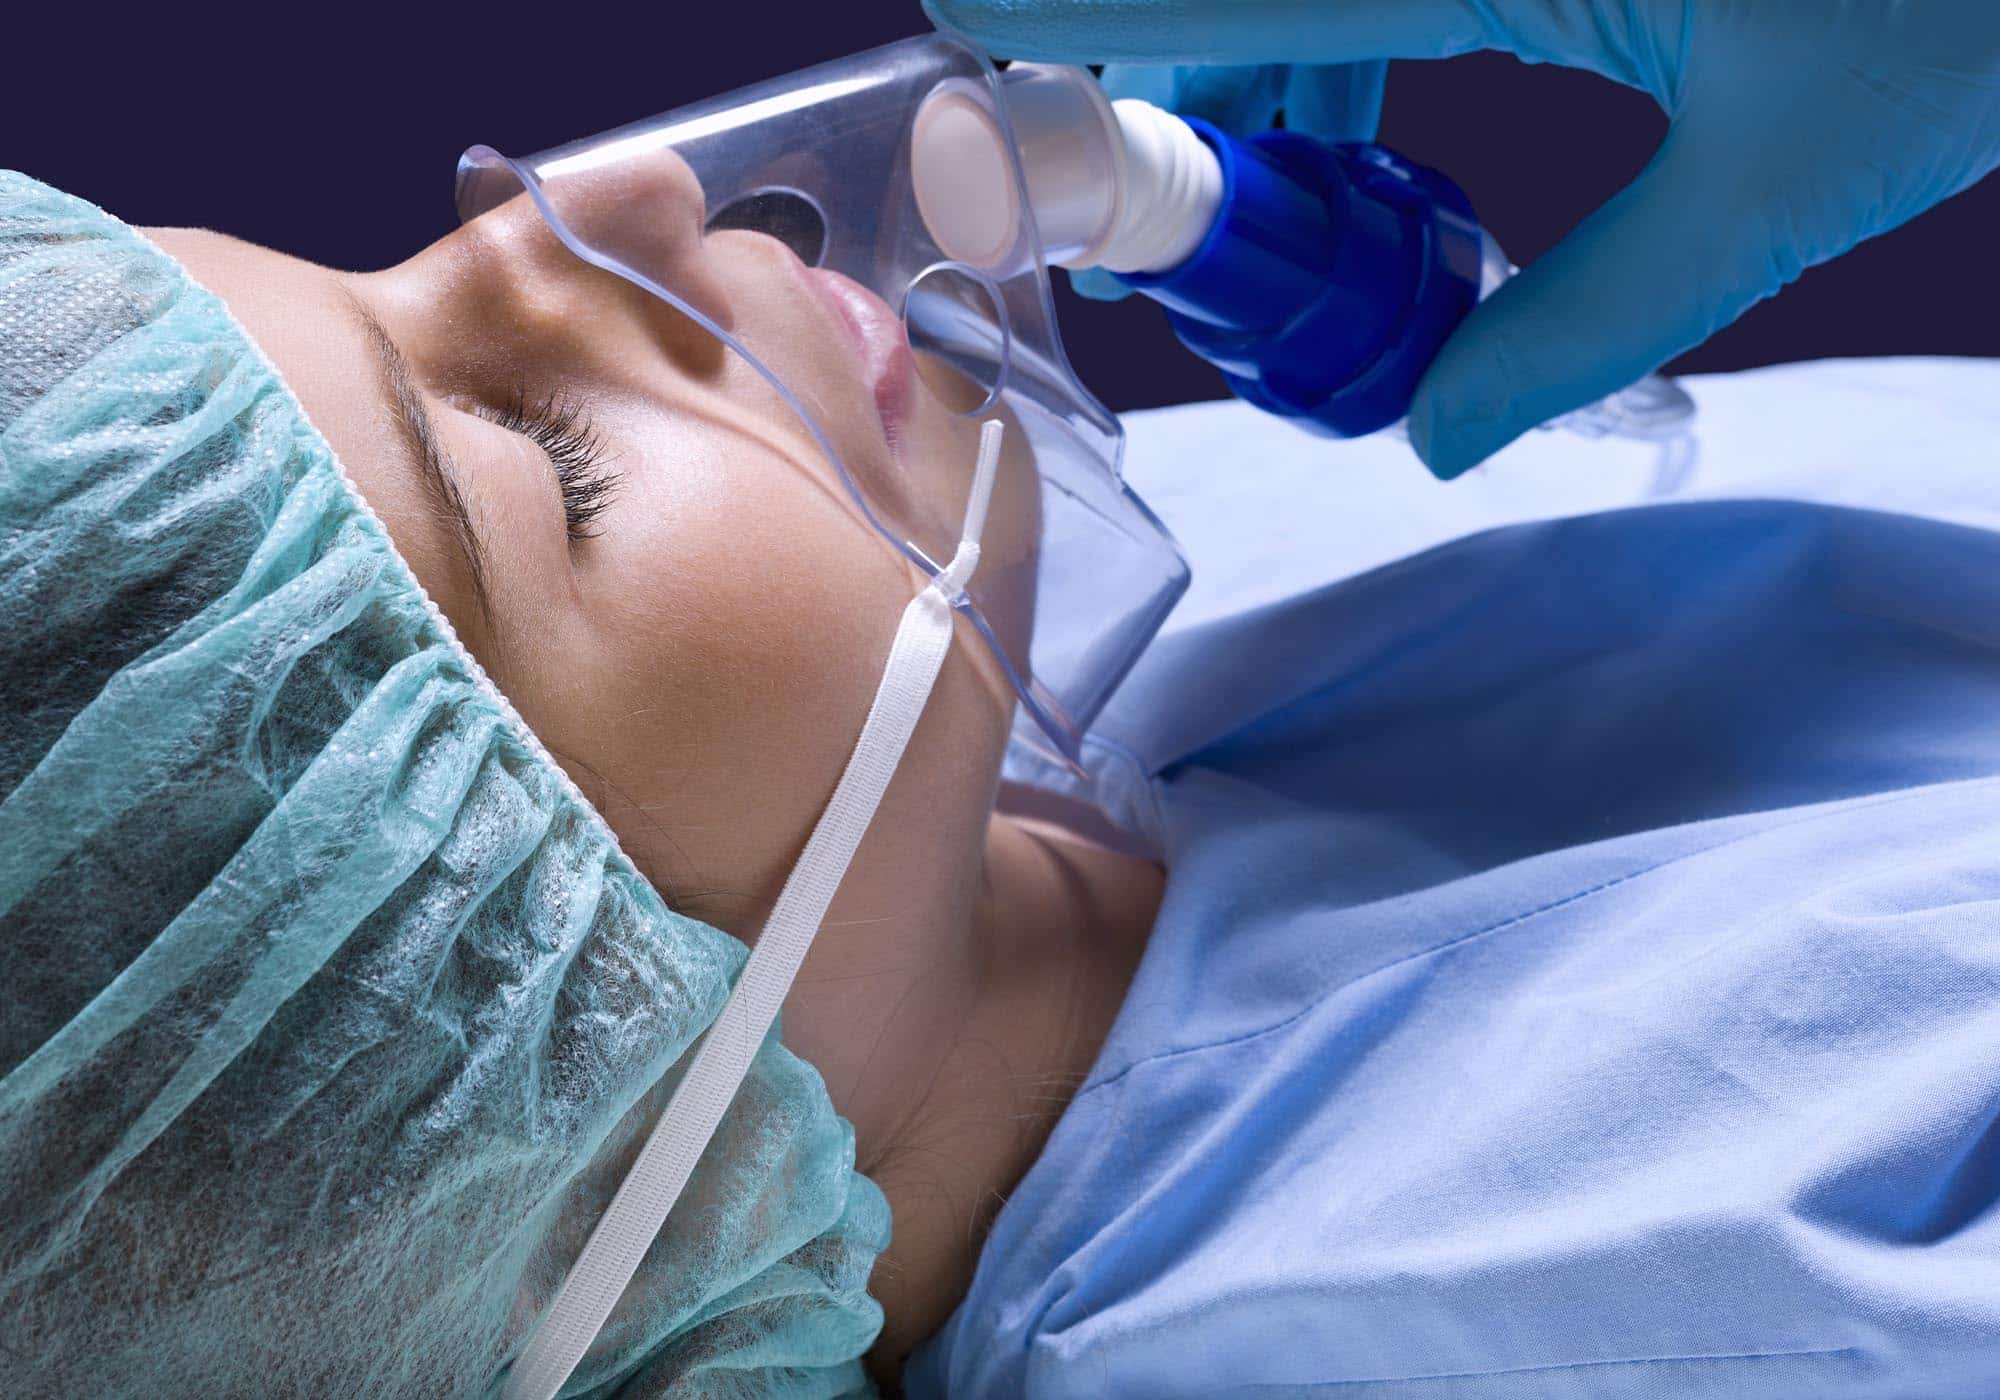 Anesthesiologists answer some of the questions they get asked most frequently before patients go under general anesthesia.